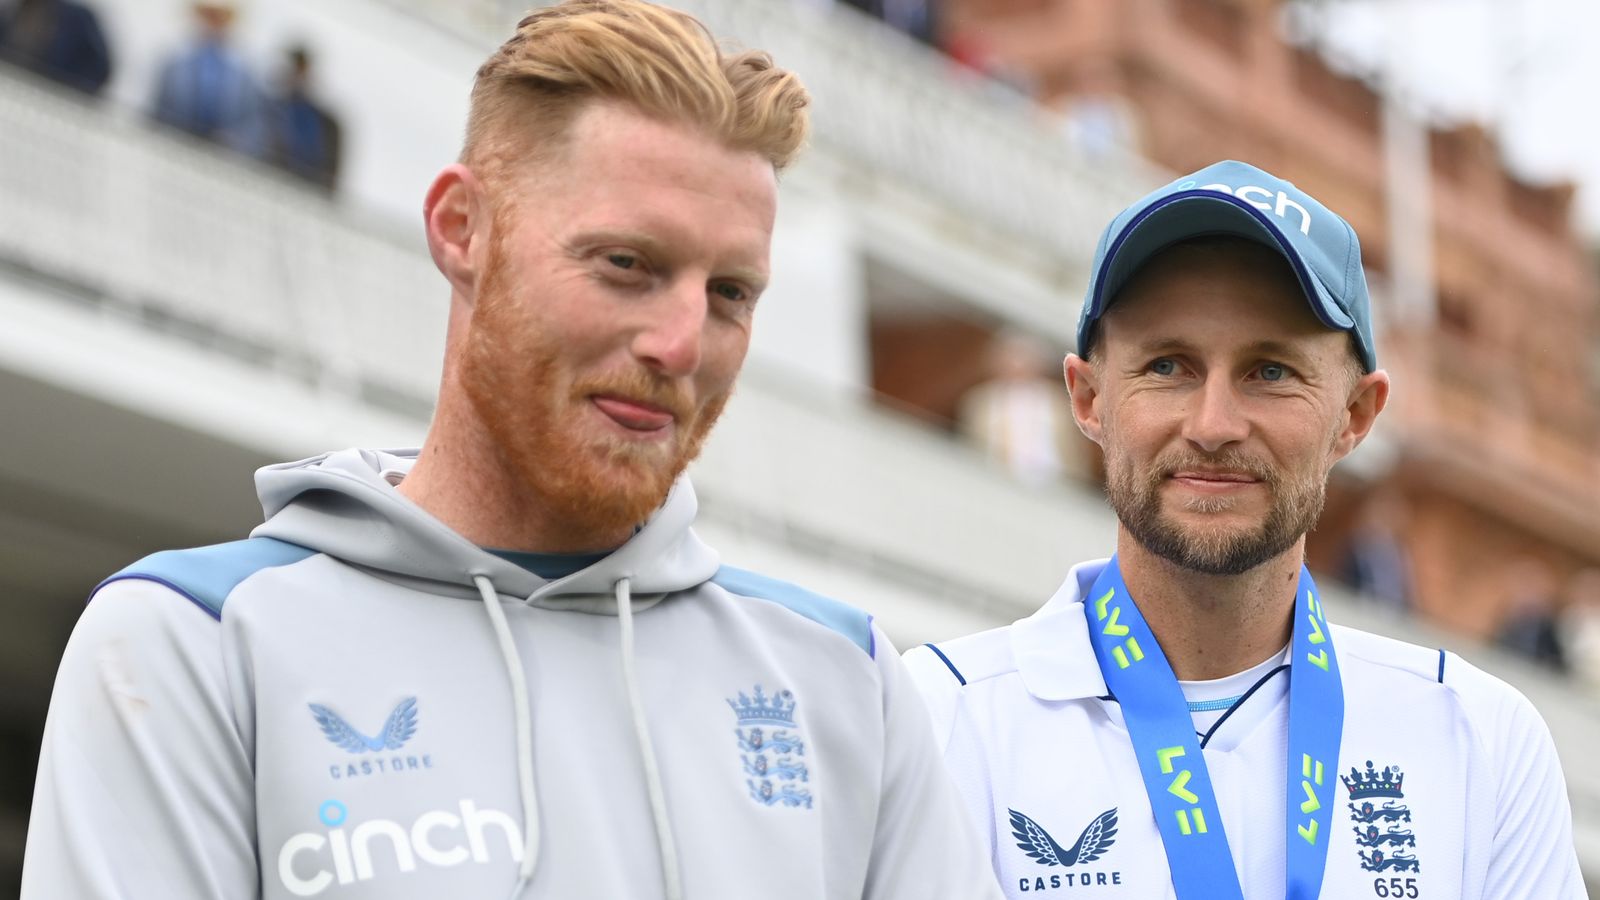 England winning start at Lord’s ‘huge’ for Ben Stokes and Brendon McCullum, says Nasser Hussain